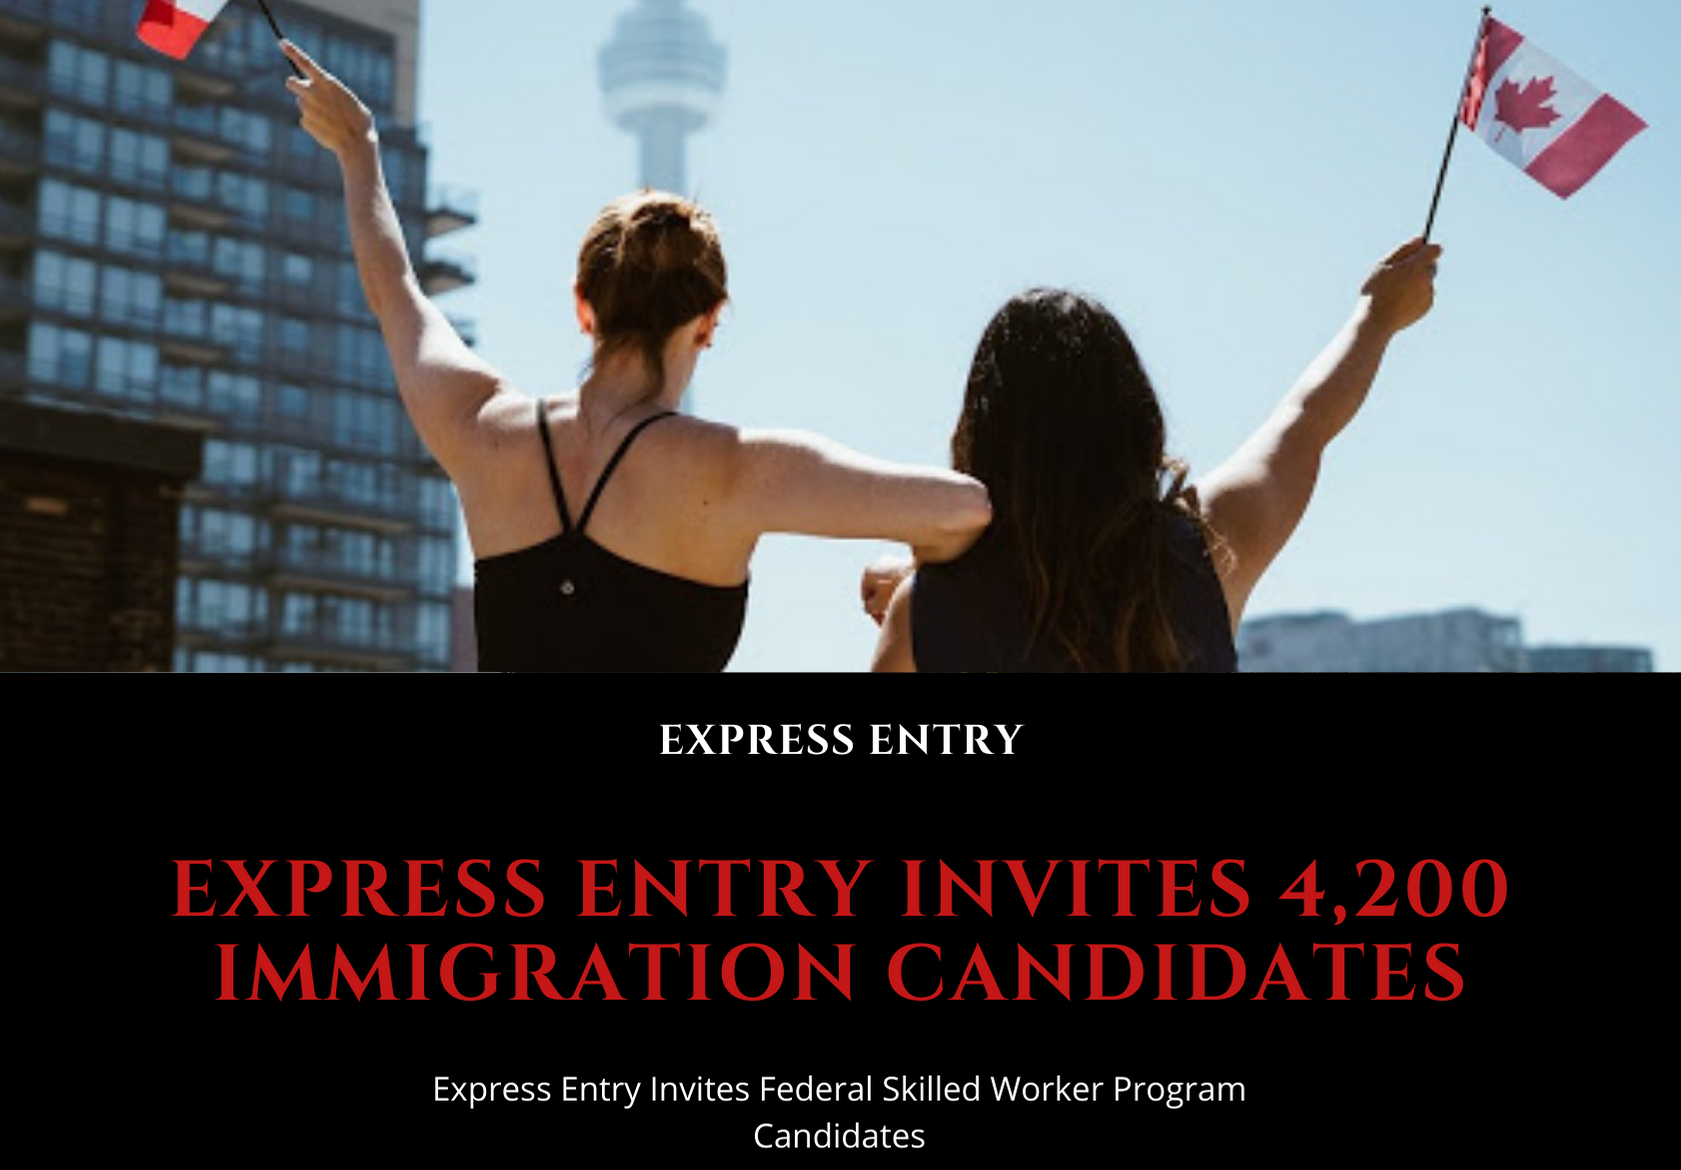 Express Entry Invites 4,200 Immigration Candidates